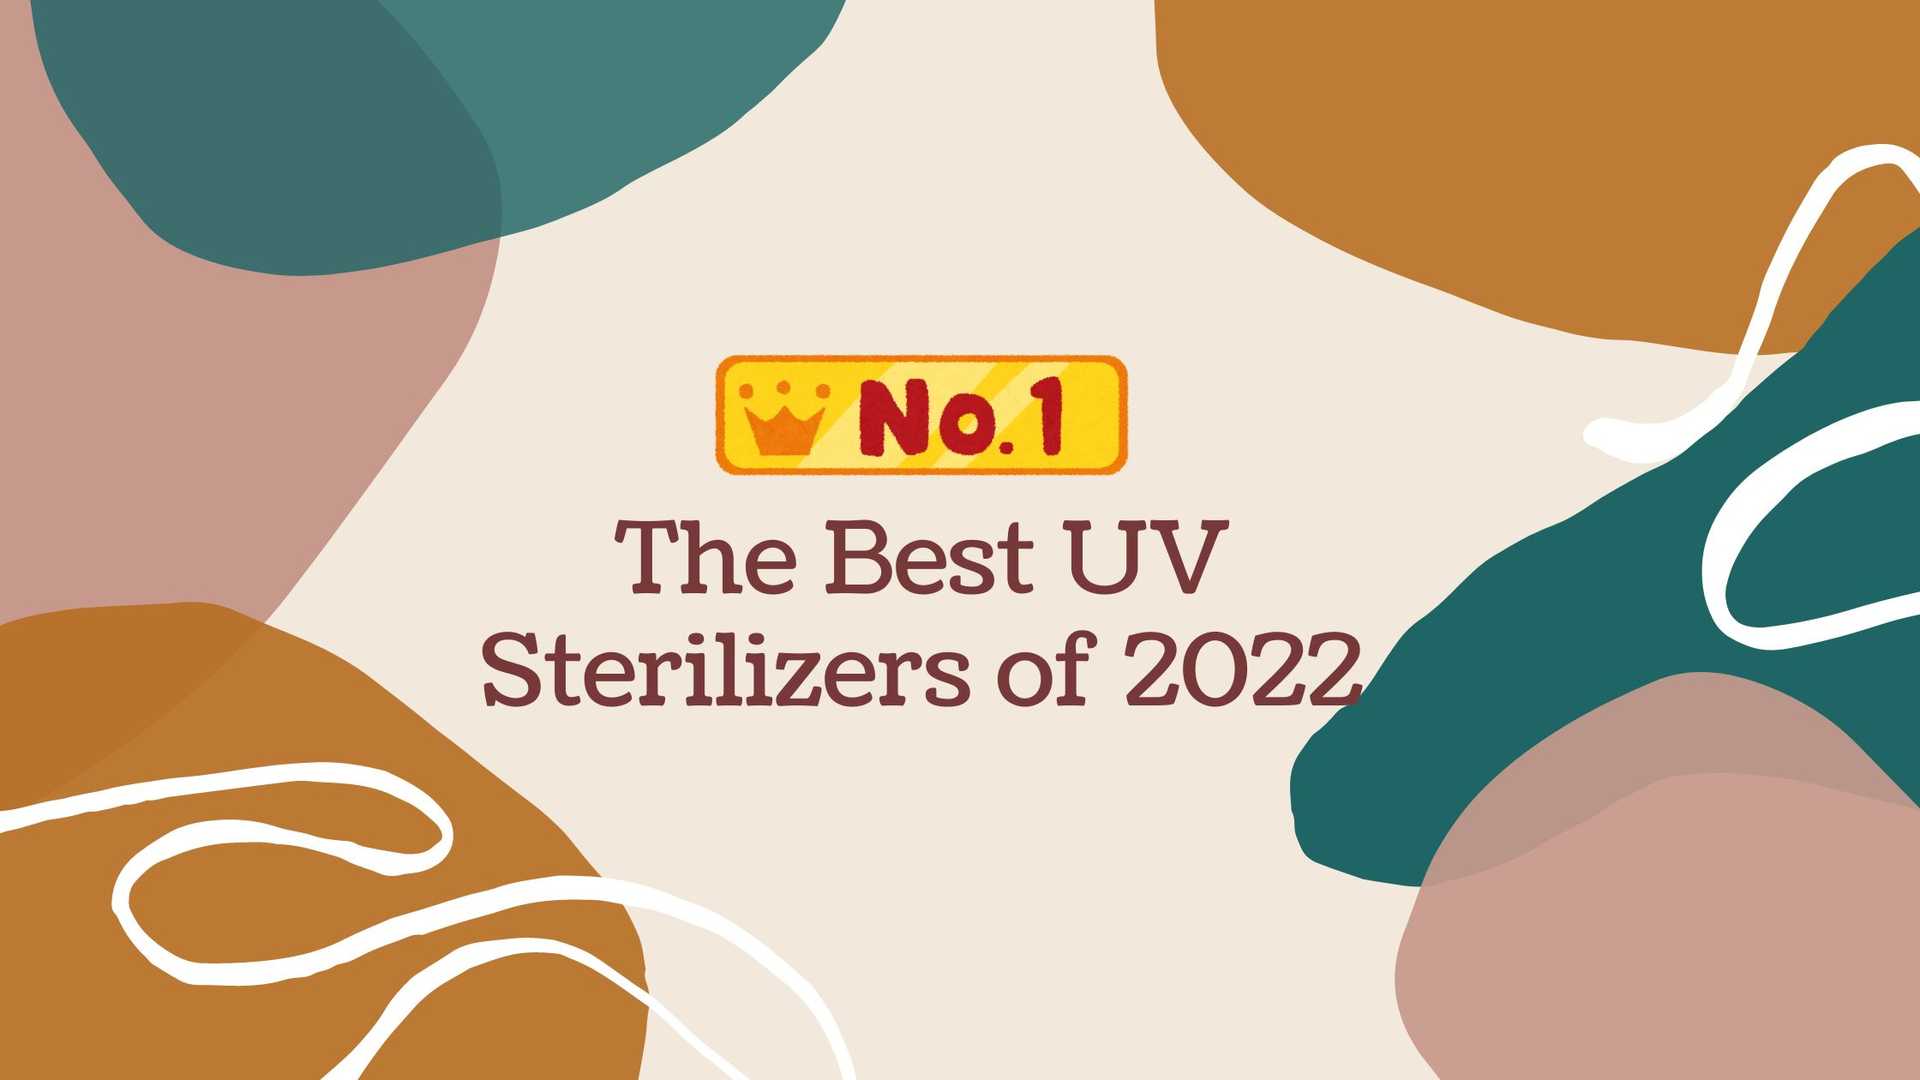 The Best UV Sterilizers of 2022